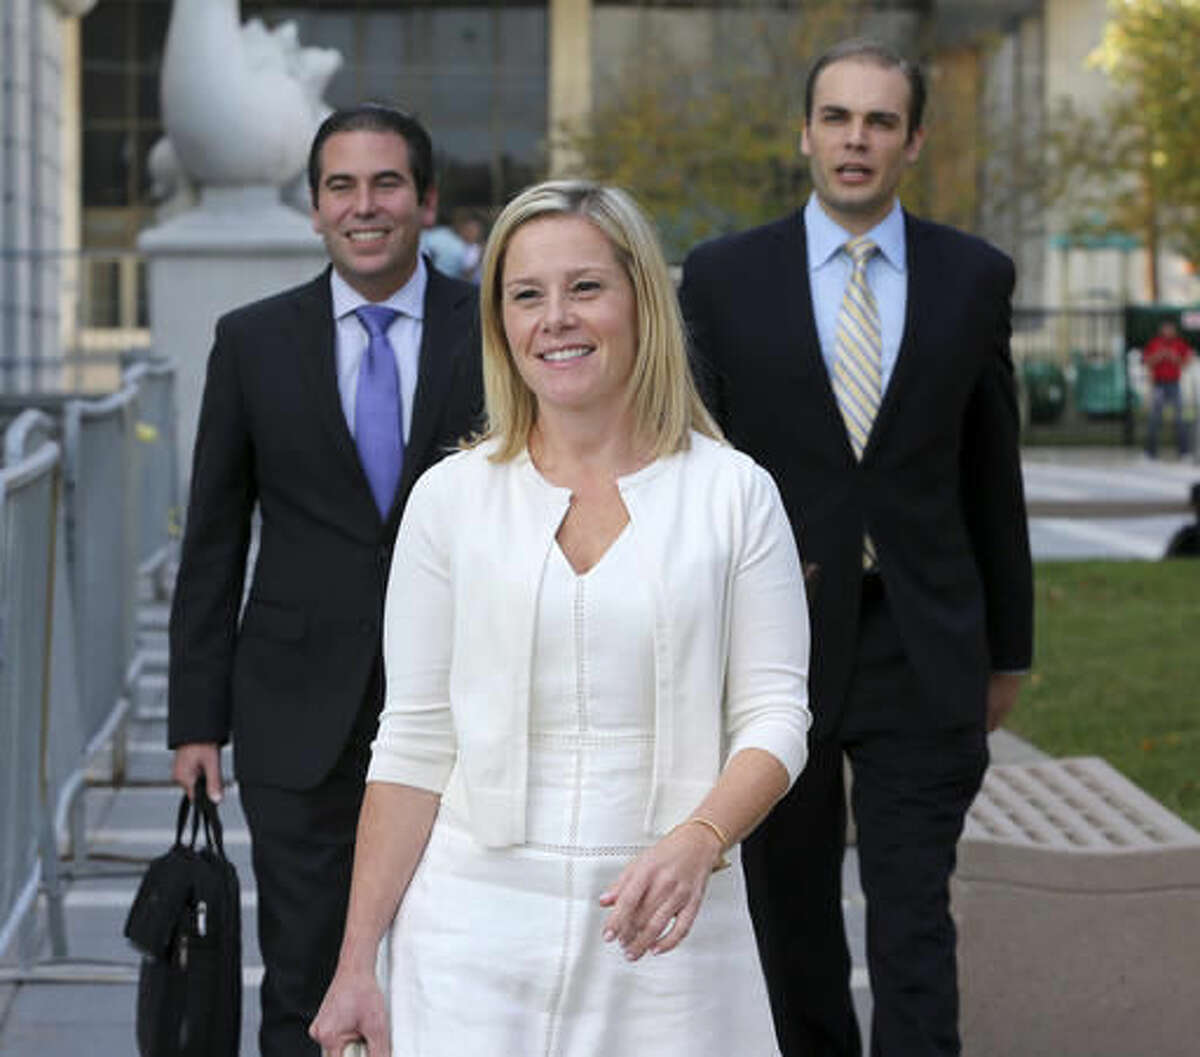 FILE - In this Wednesday, Oct. 19, 2016 file photo, Gov. Chris Christie's former Deputy Chief of Staff Bridget Anne Kelly, center, leaves Martin Luther King Jr. Courthouse after a hearing, in Newark, N.J. Kelly, who prosecutors say sent the "time for some traffic problems" email that started the George Washington Bridge lane-closing scandal is set to testify in her own defense. Kelly is expected to take the stand later Friday, Oct. 21, 2016, in federal court in Newark. (AP Photo/Mel Evans, File)